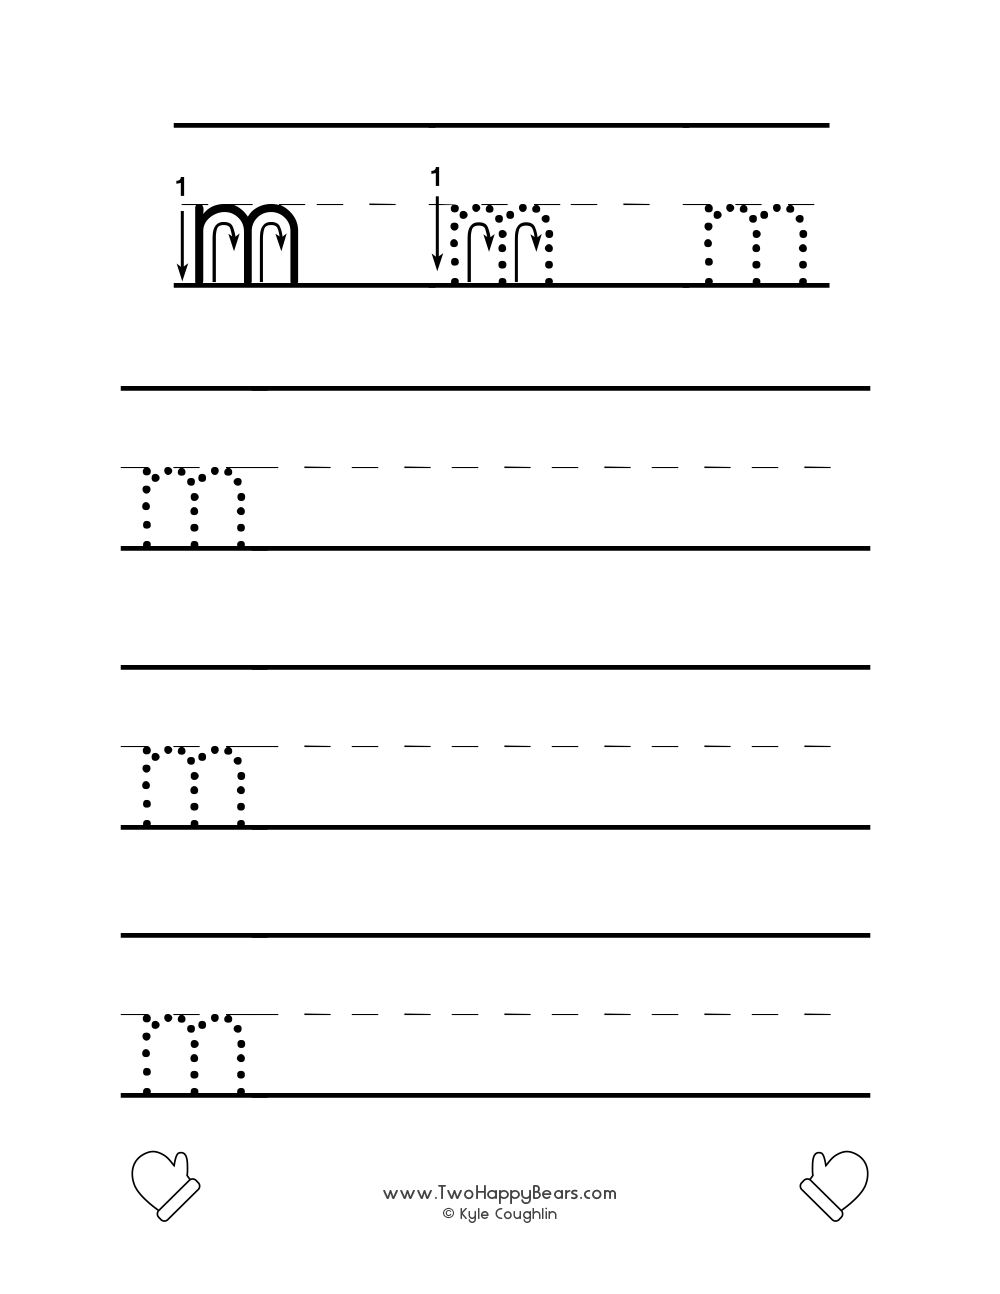 Lowercase letter M worksheet for tracing and drawing